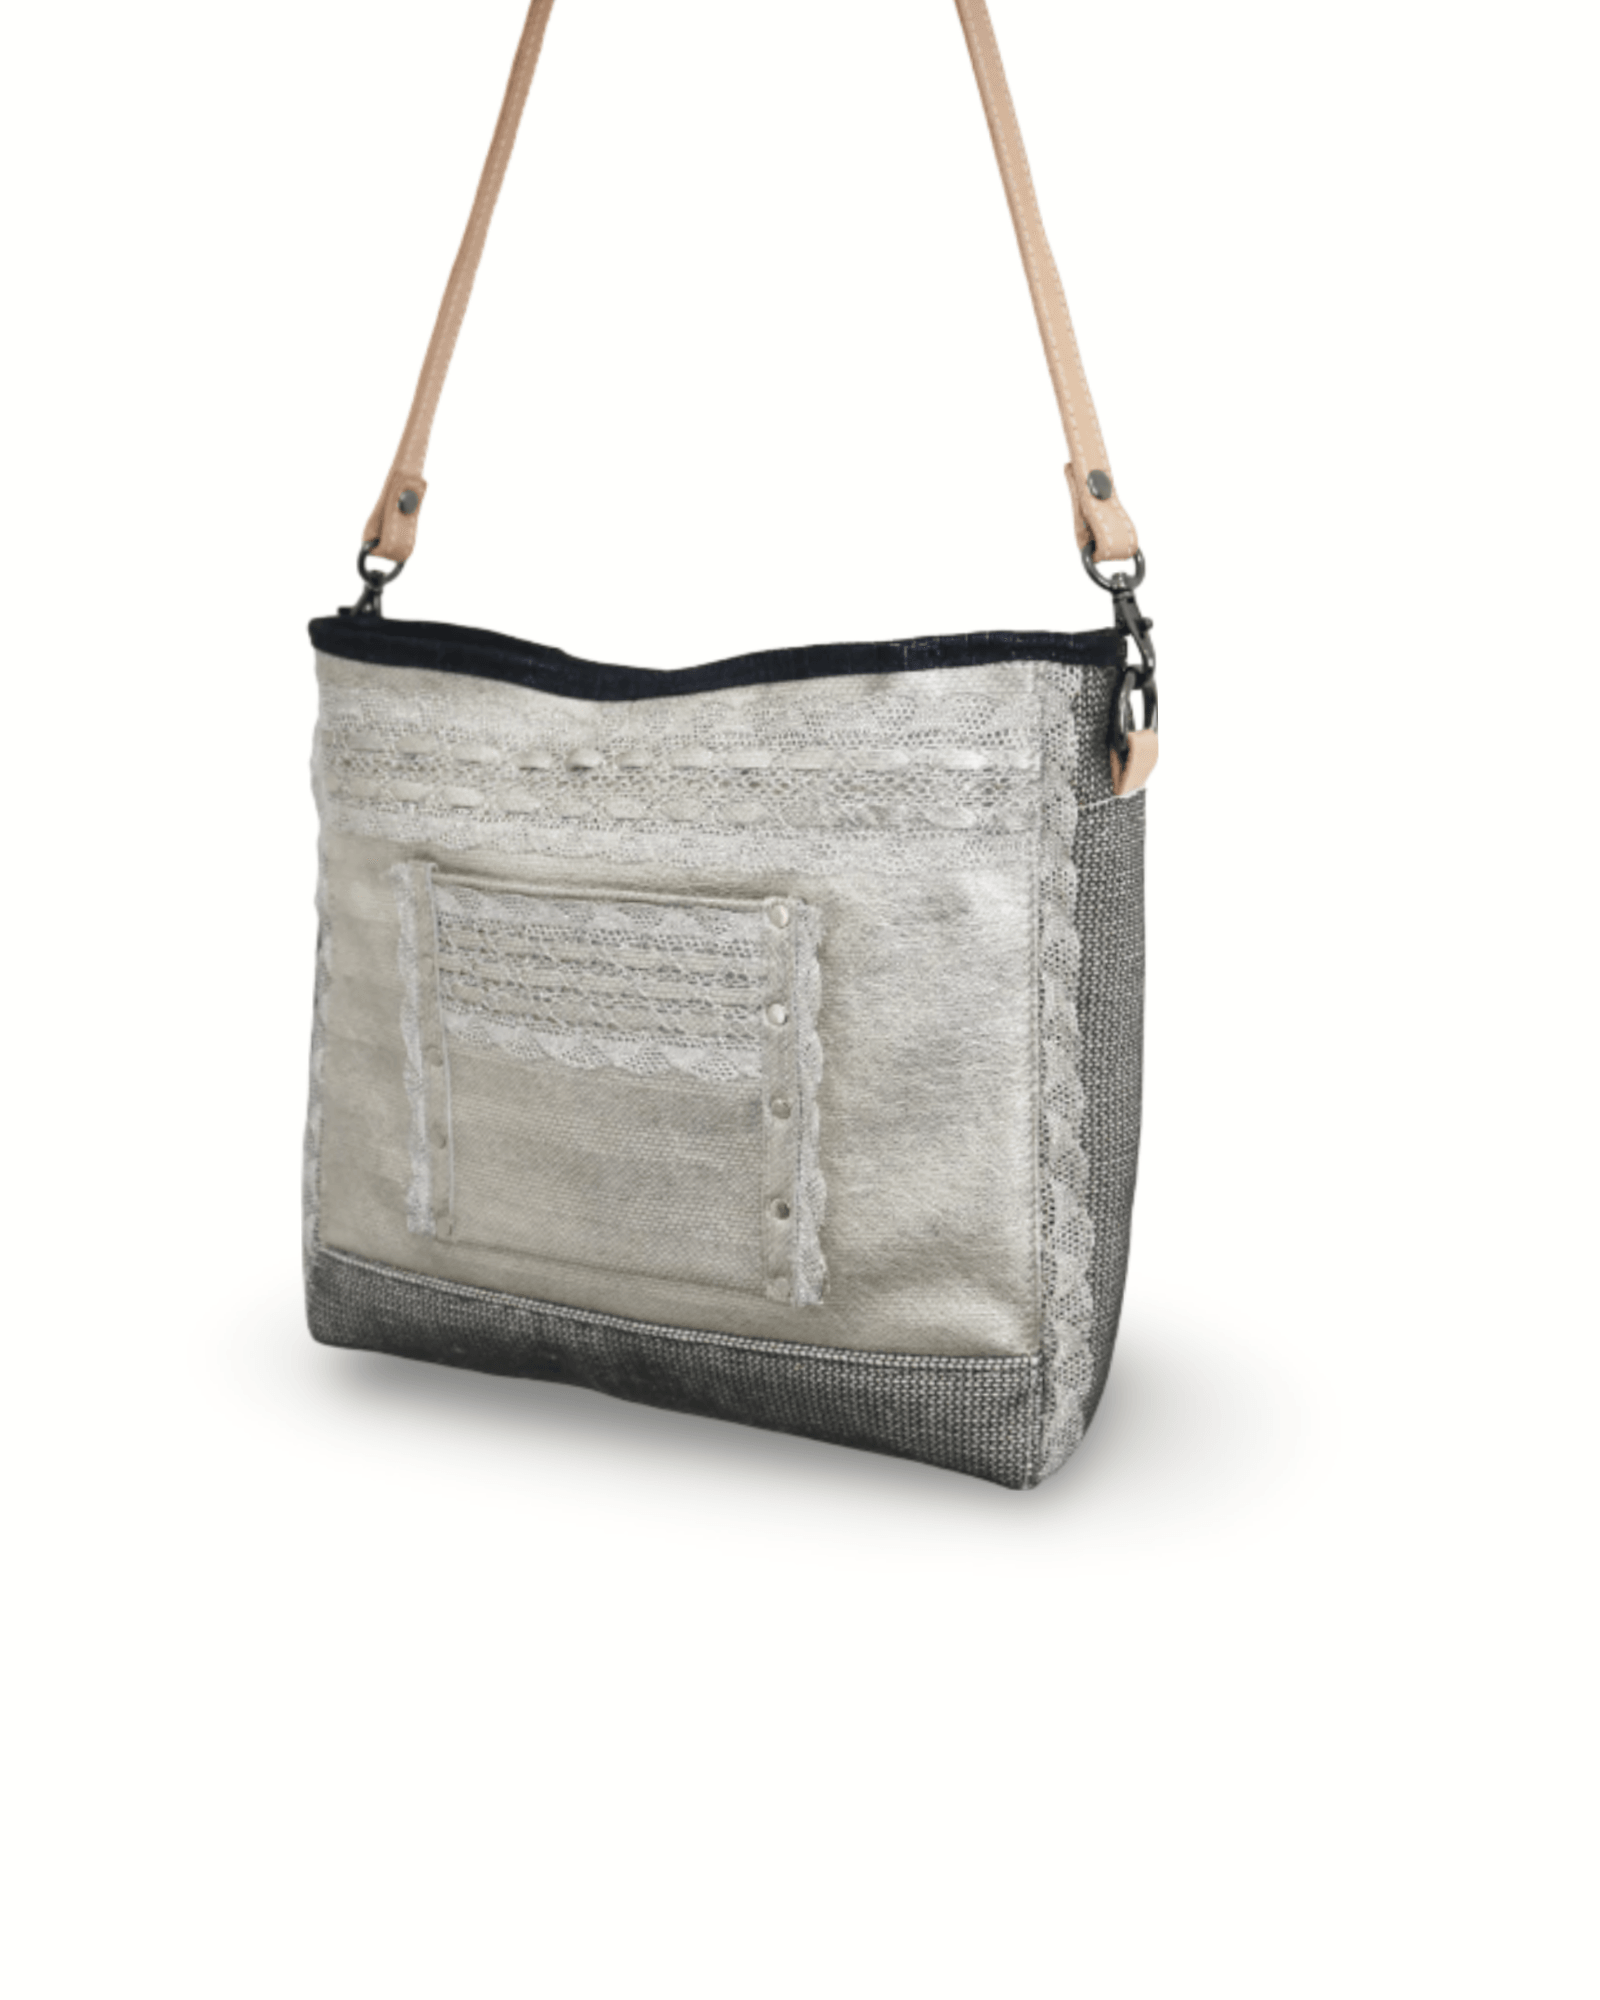 Metallic Leather with Mesh Accents bag - ORIEN VIN TIQUE